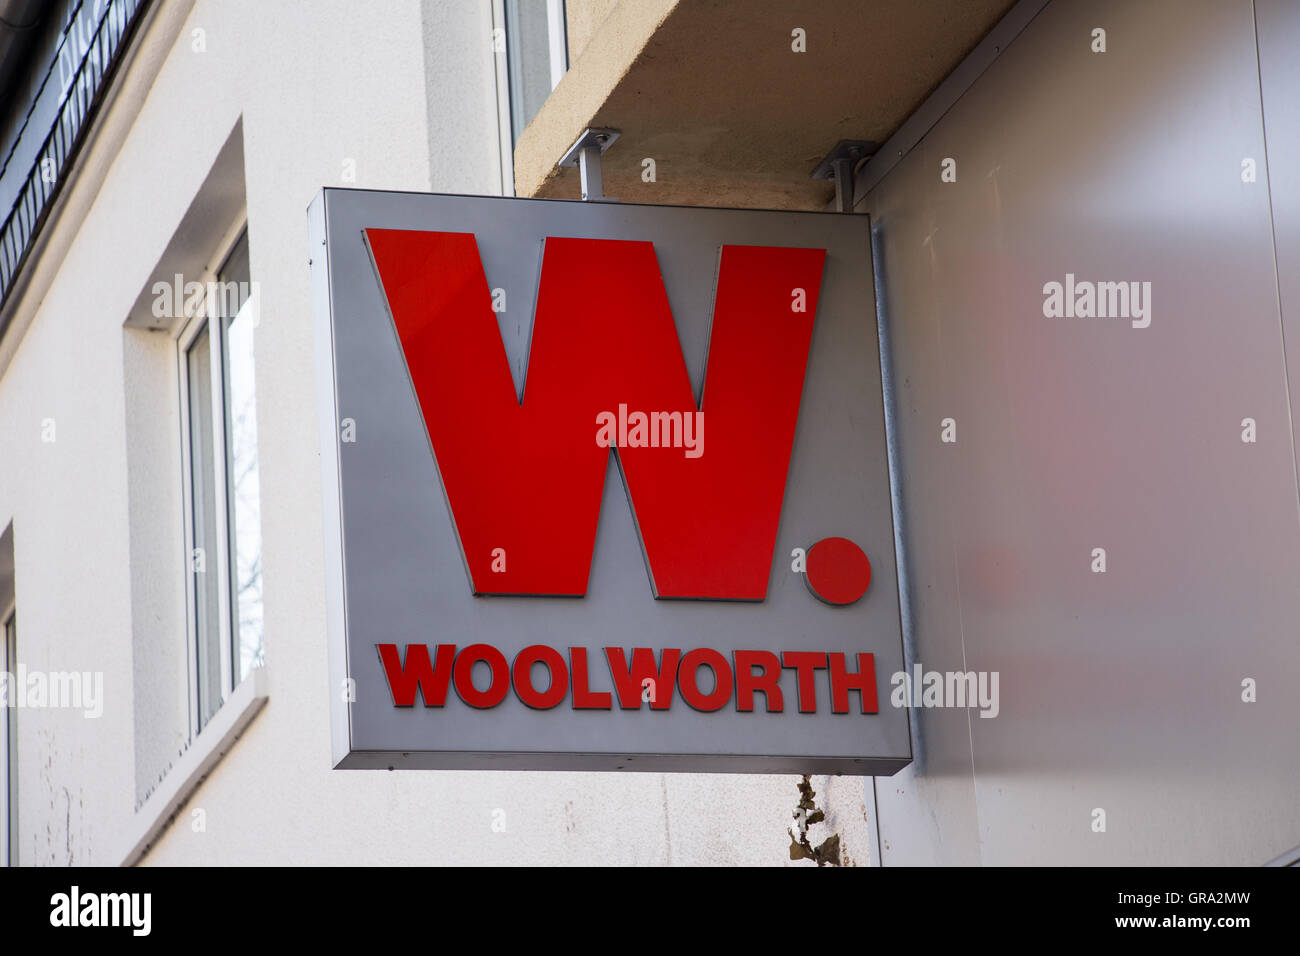 Woolworth Logo High Resolution Stock Photography and Images - Alamy